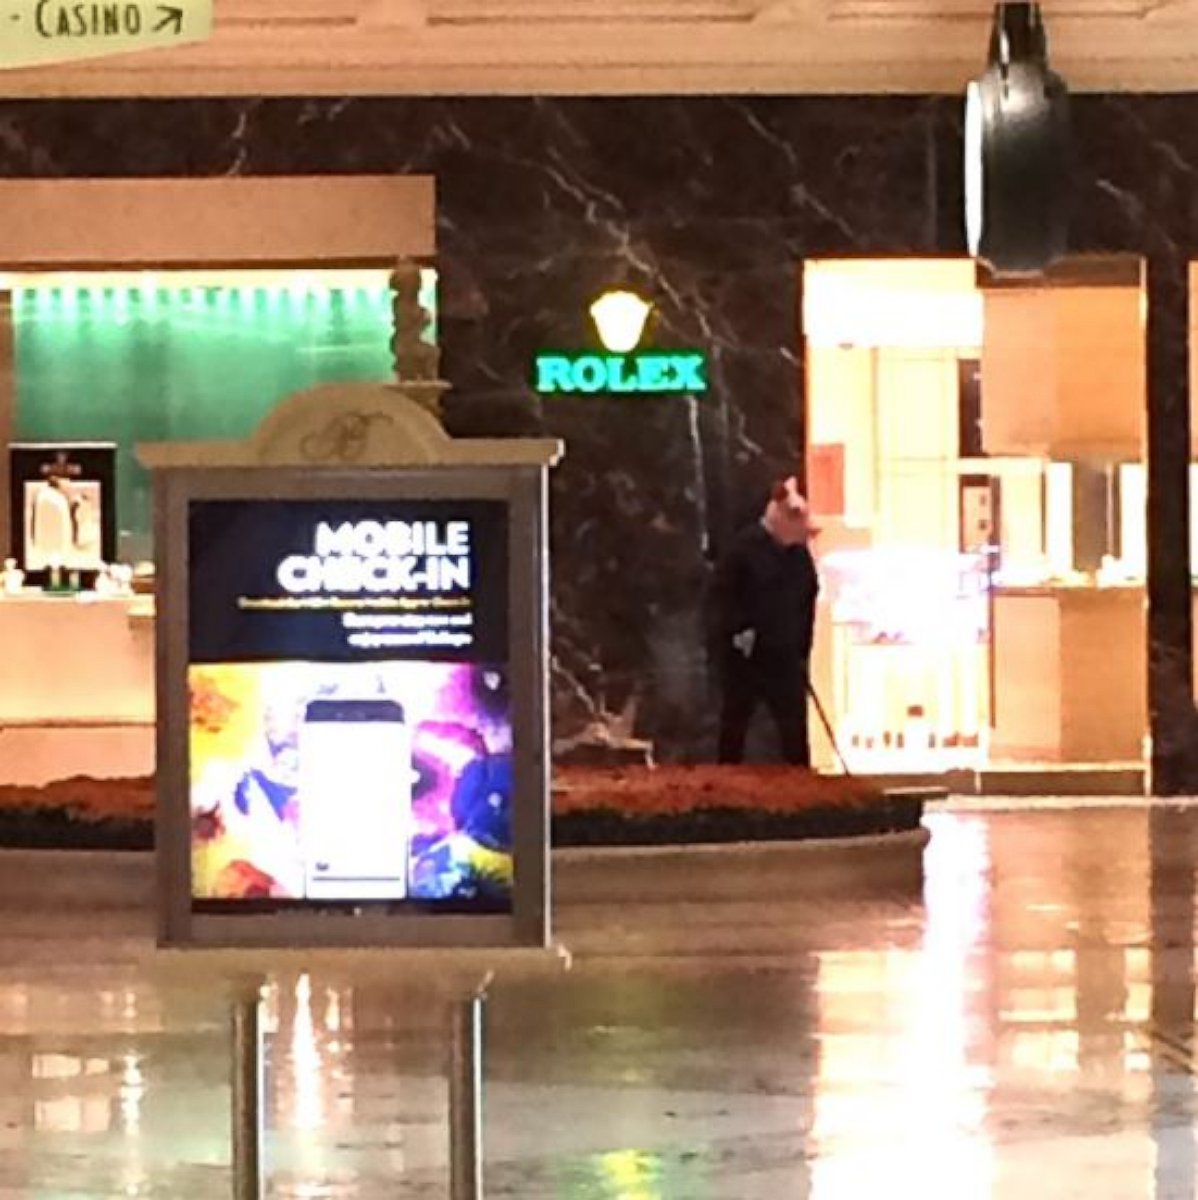 PHOTO: An eyewitness tweeted this photo of an individual outside the Rolex store at the Bellagio in Las Vegas on March 25, 2017. The eyewitness claimed the individual was carrying a gun.